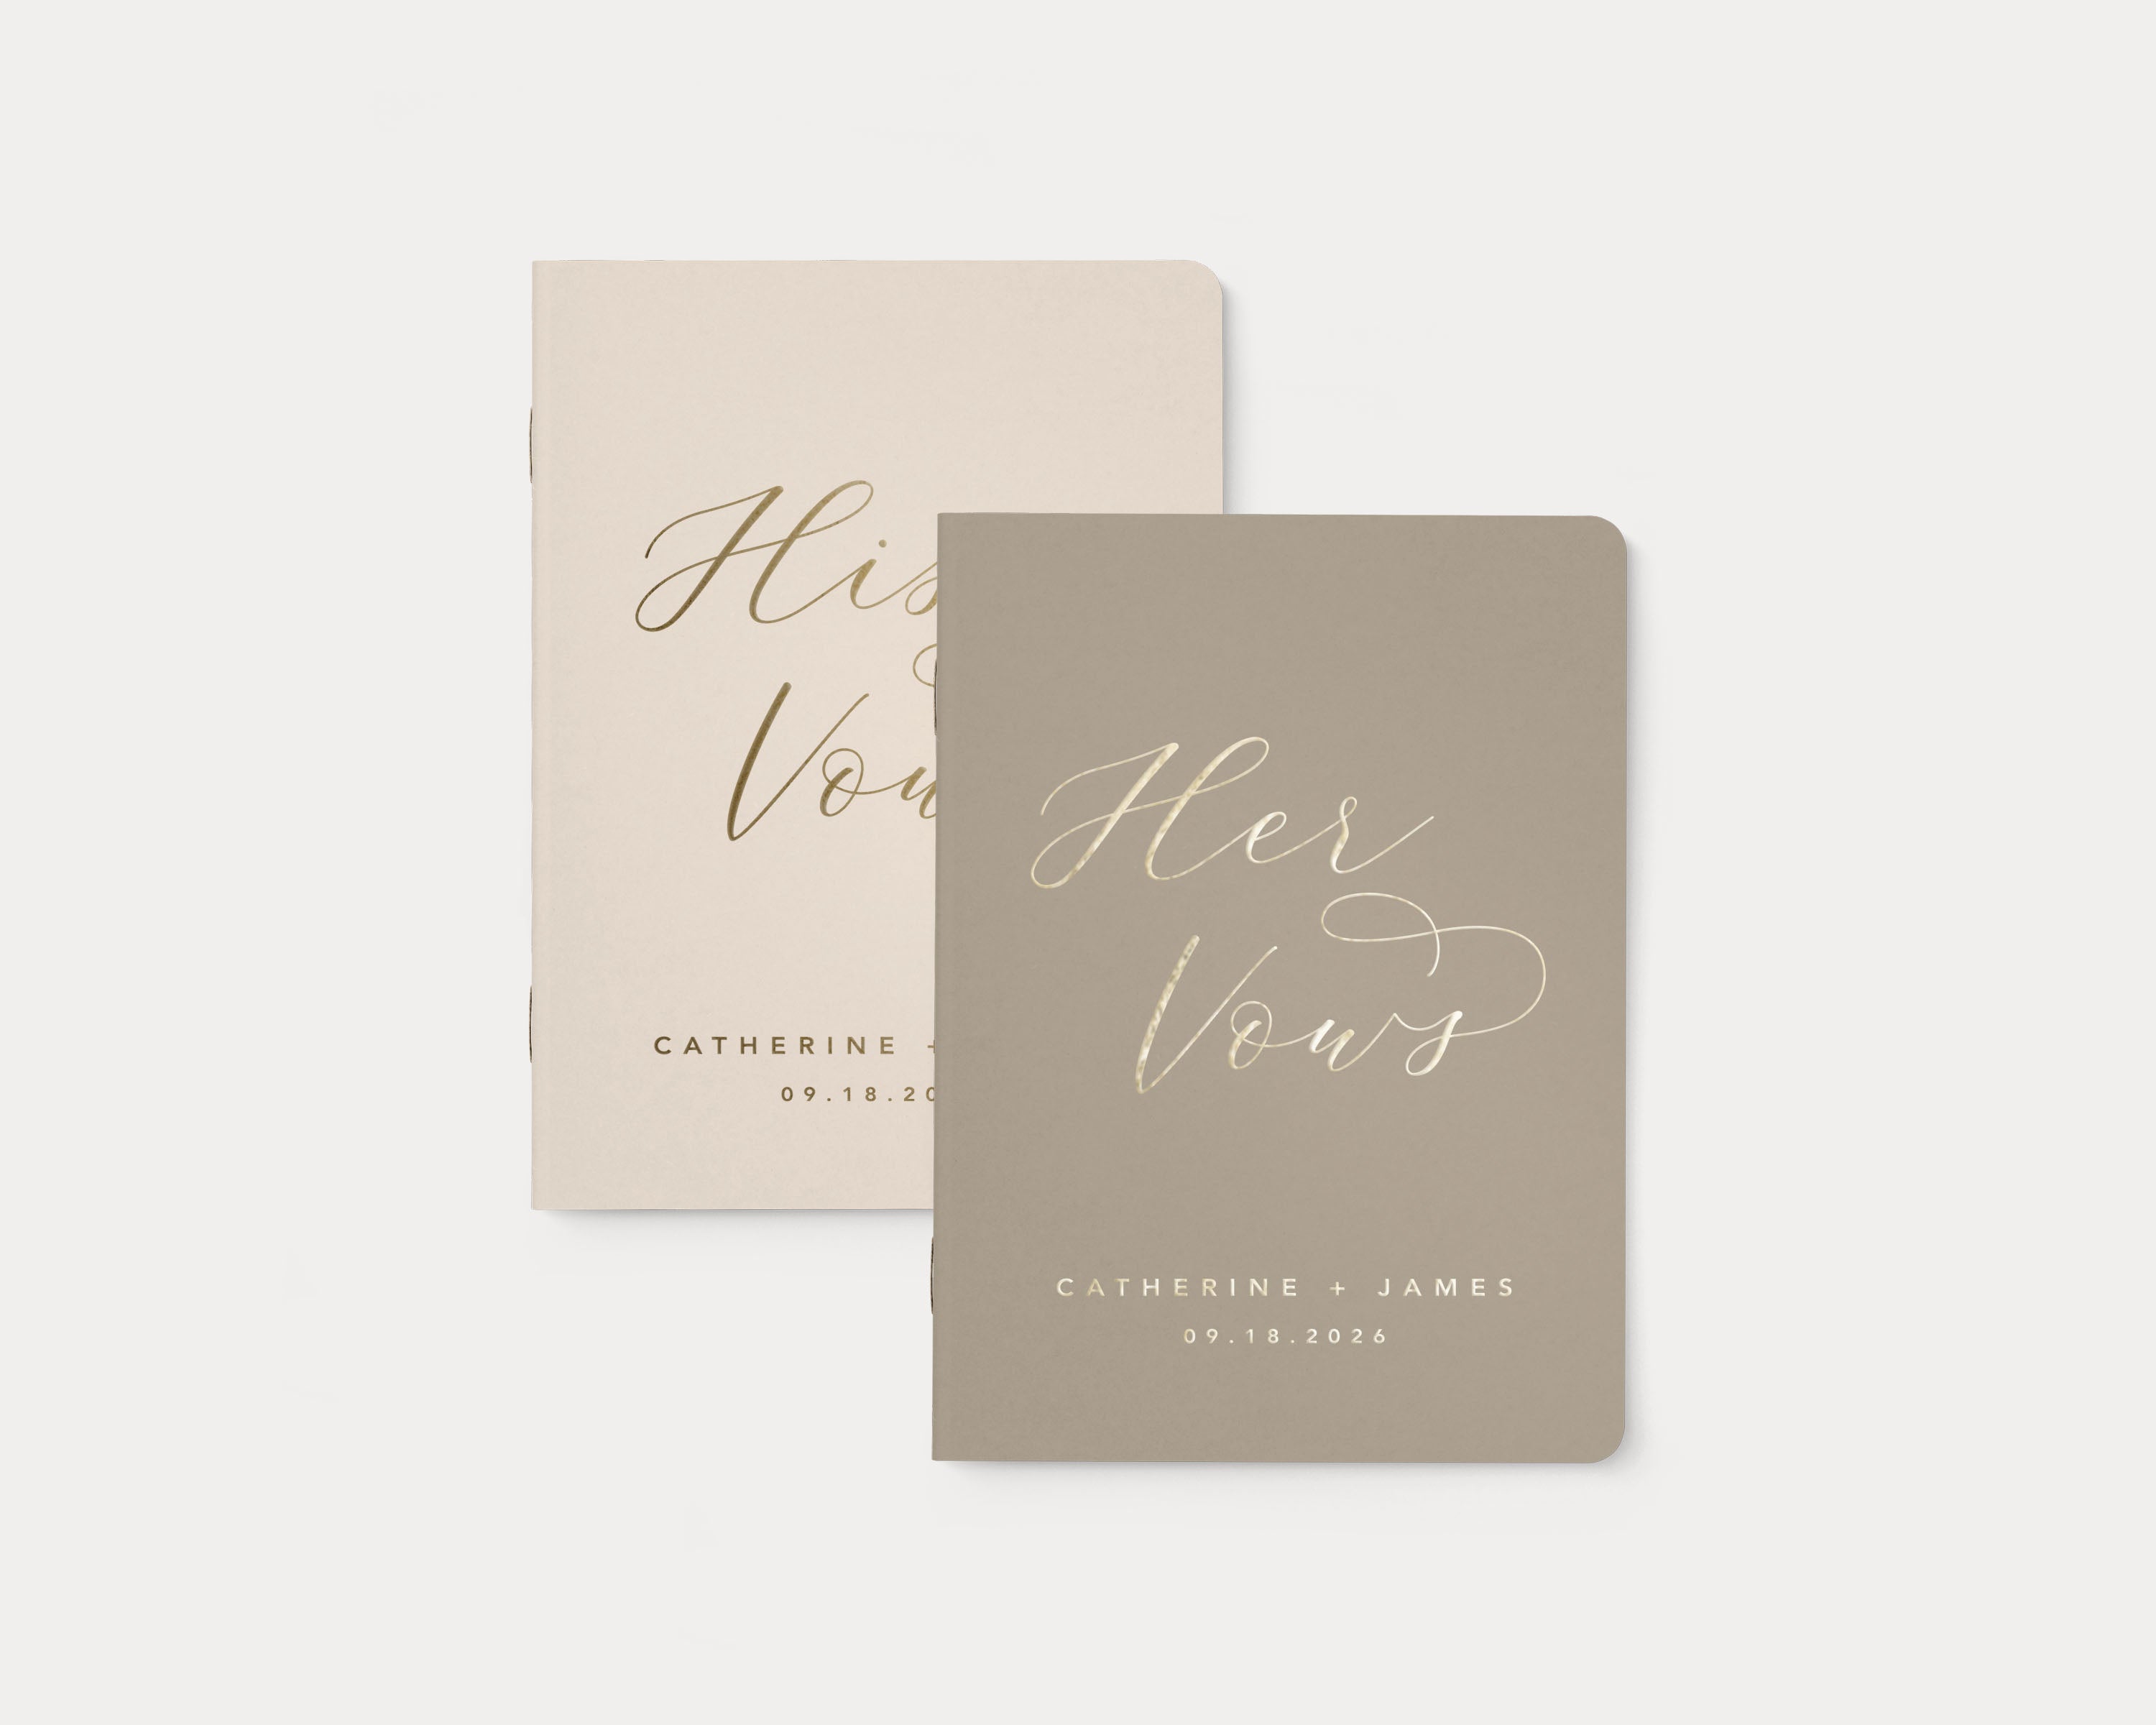 Luxury personalized vow book pair with gold foil text.